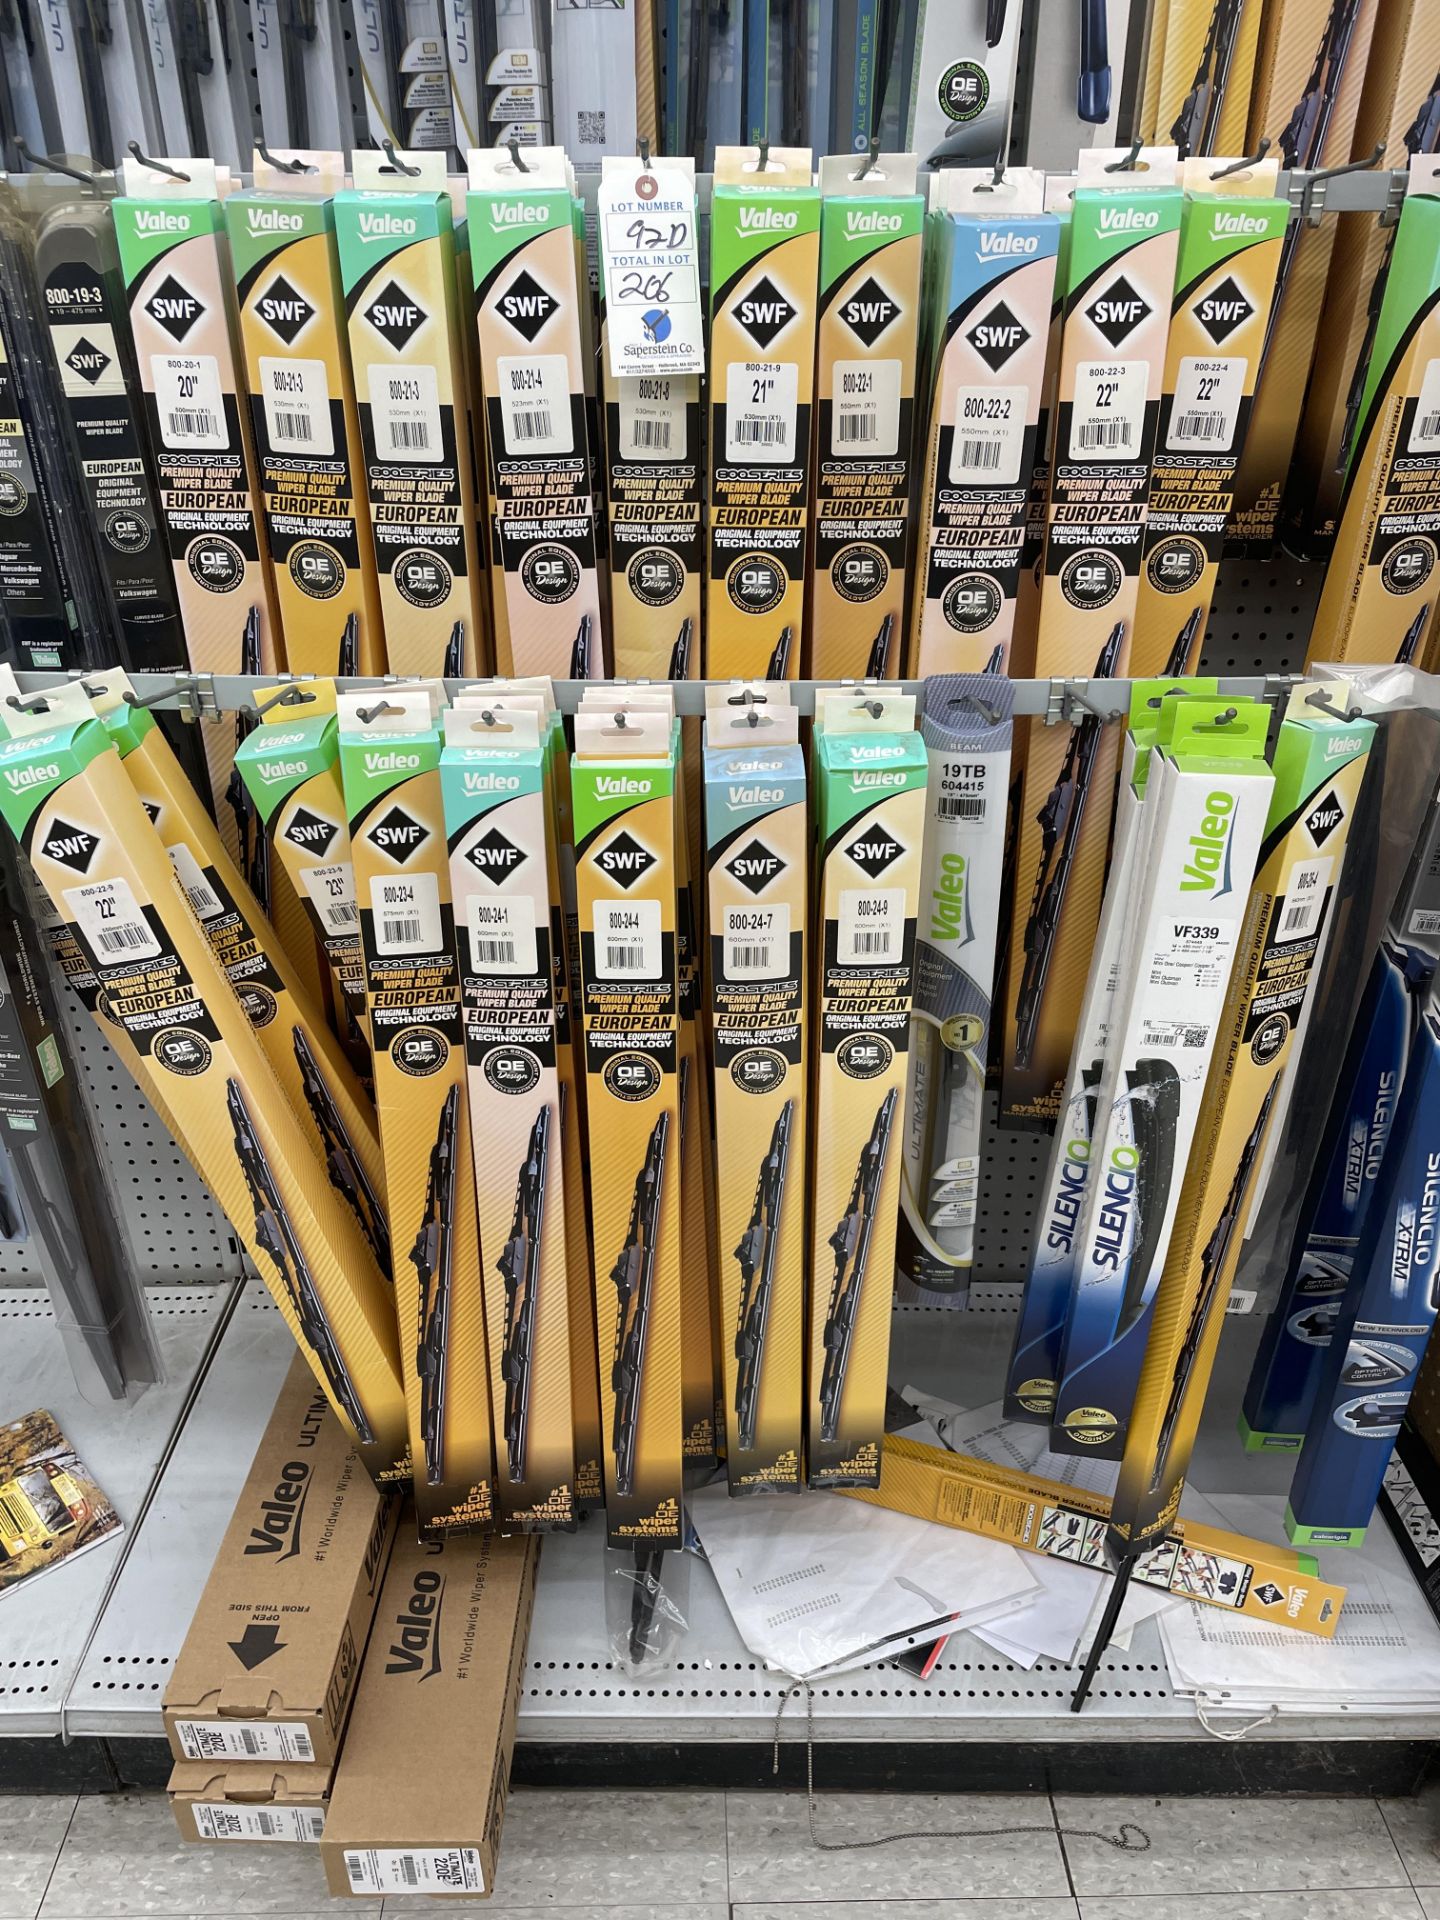 {LOT} (206) Valeo Rear and European Vehicle Specific Wiper Blades w/Wholesale Value of $1,985 - Image 3 of 4